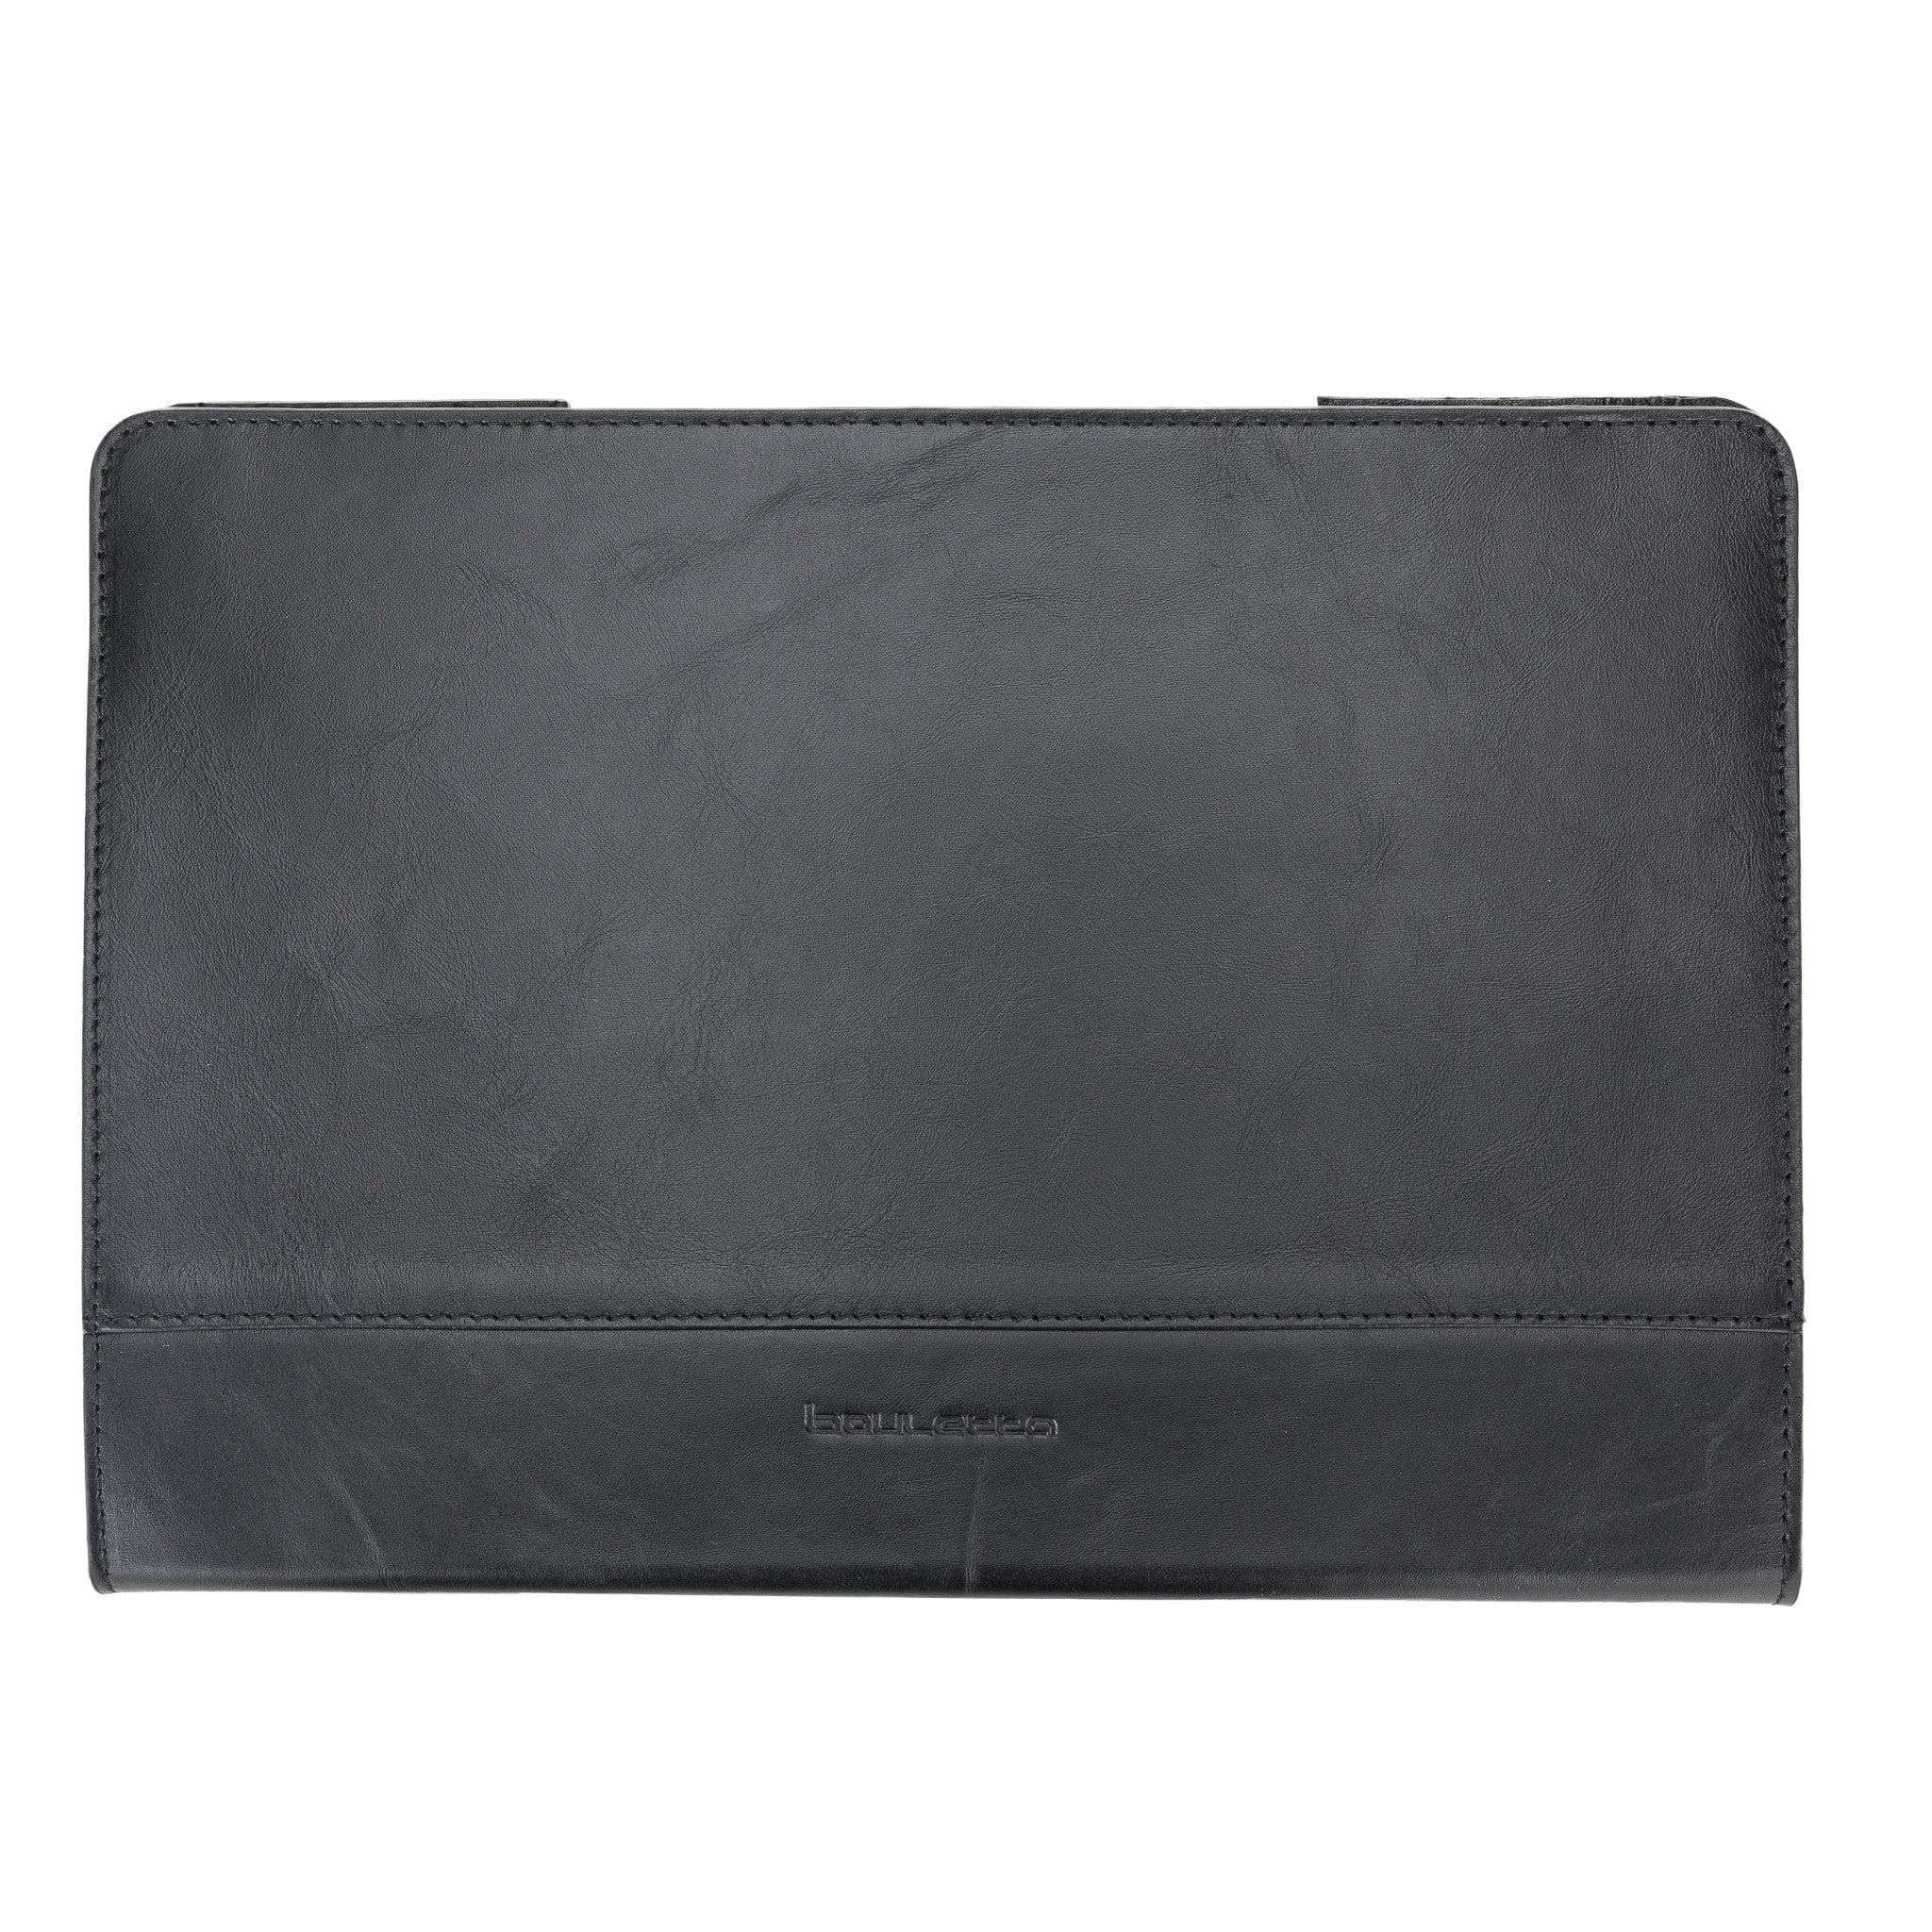 Chester Leather Sleeve for 13.3" to 16.2" Apple MacBook/Laptops Bouletta